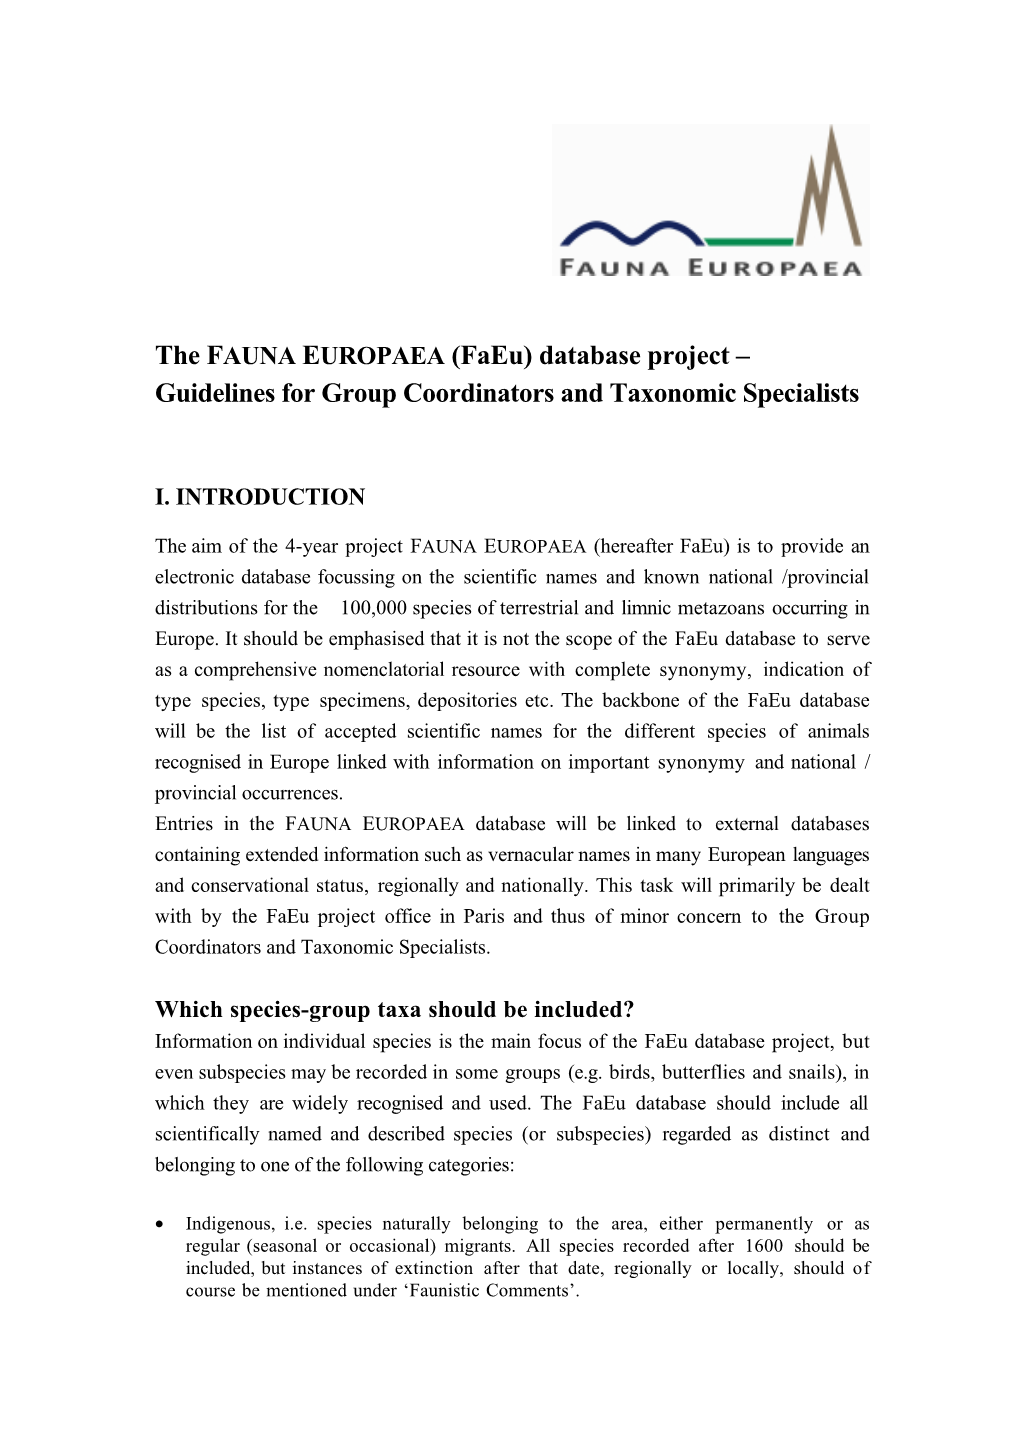 Fauna Europaea Guidelines for Group Coordinators and Taxonomic